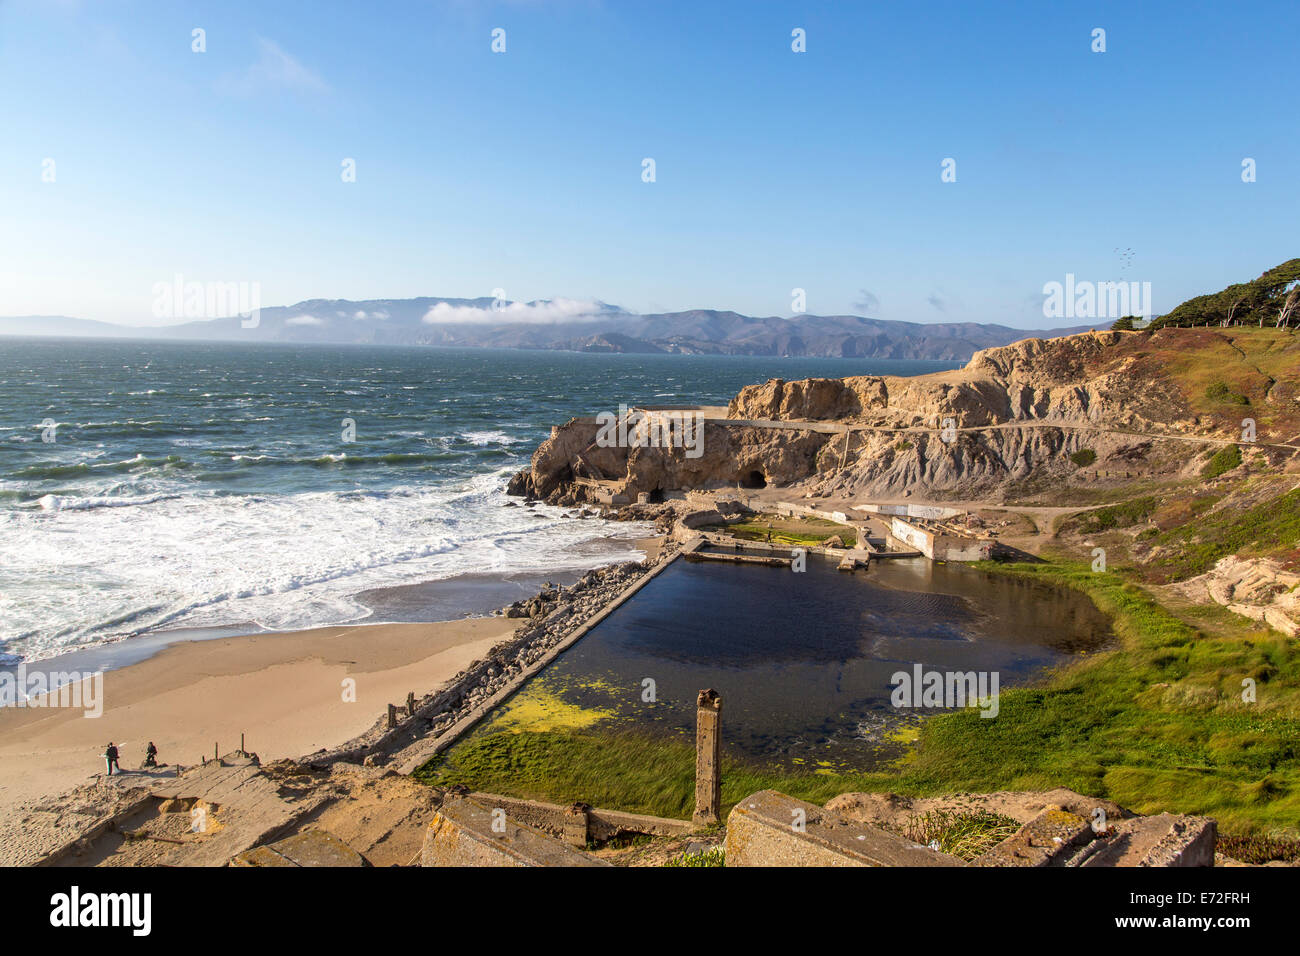 Ruins of the Sutro baths along the Pacific Oceans at Lands End in San Francisco, California, USA. Stock Photo